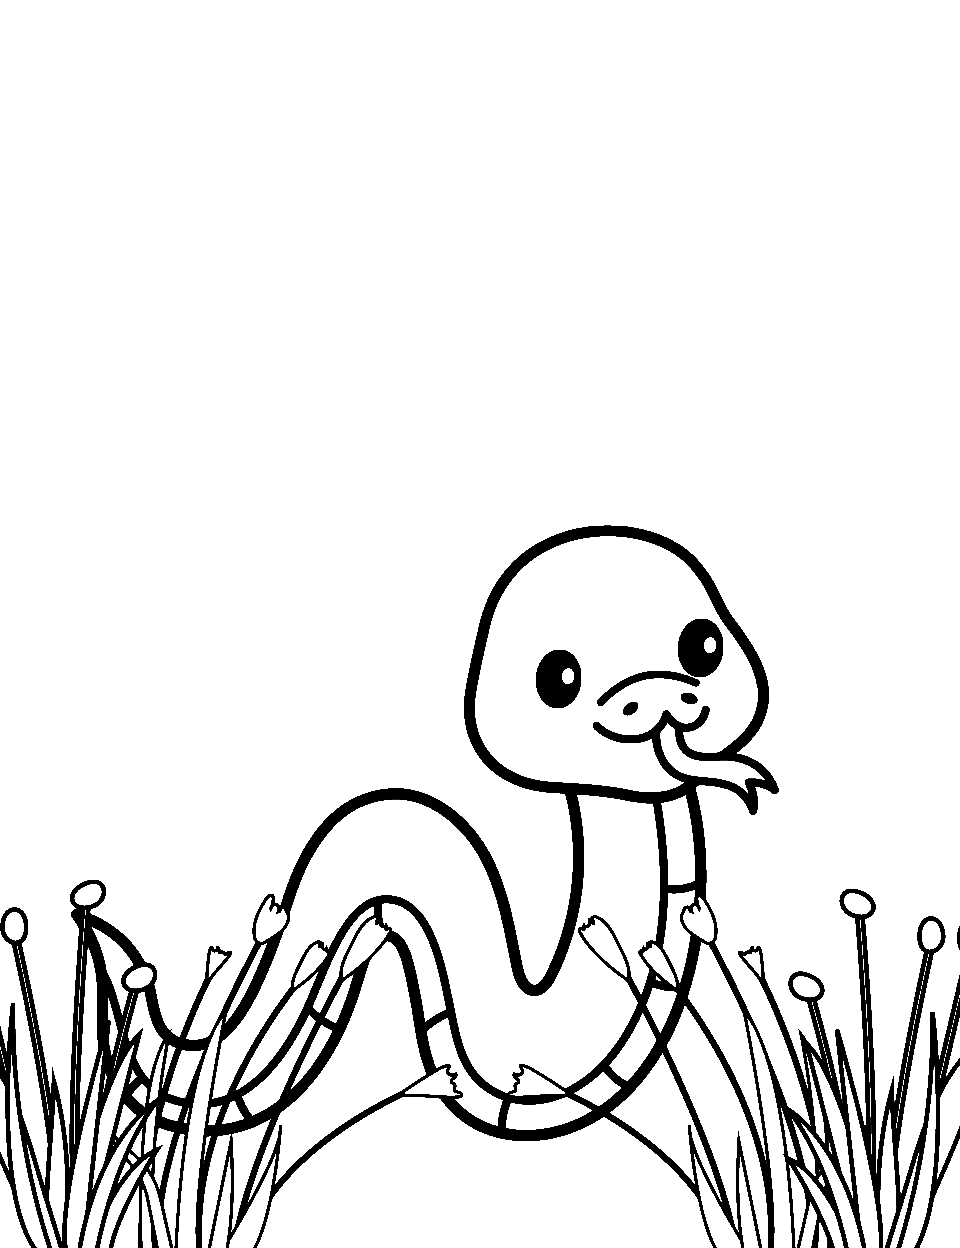 Baby Snake's First Exploration Coloring Page - A tiny baby snake, curiously exploring its surroundings.